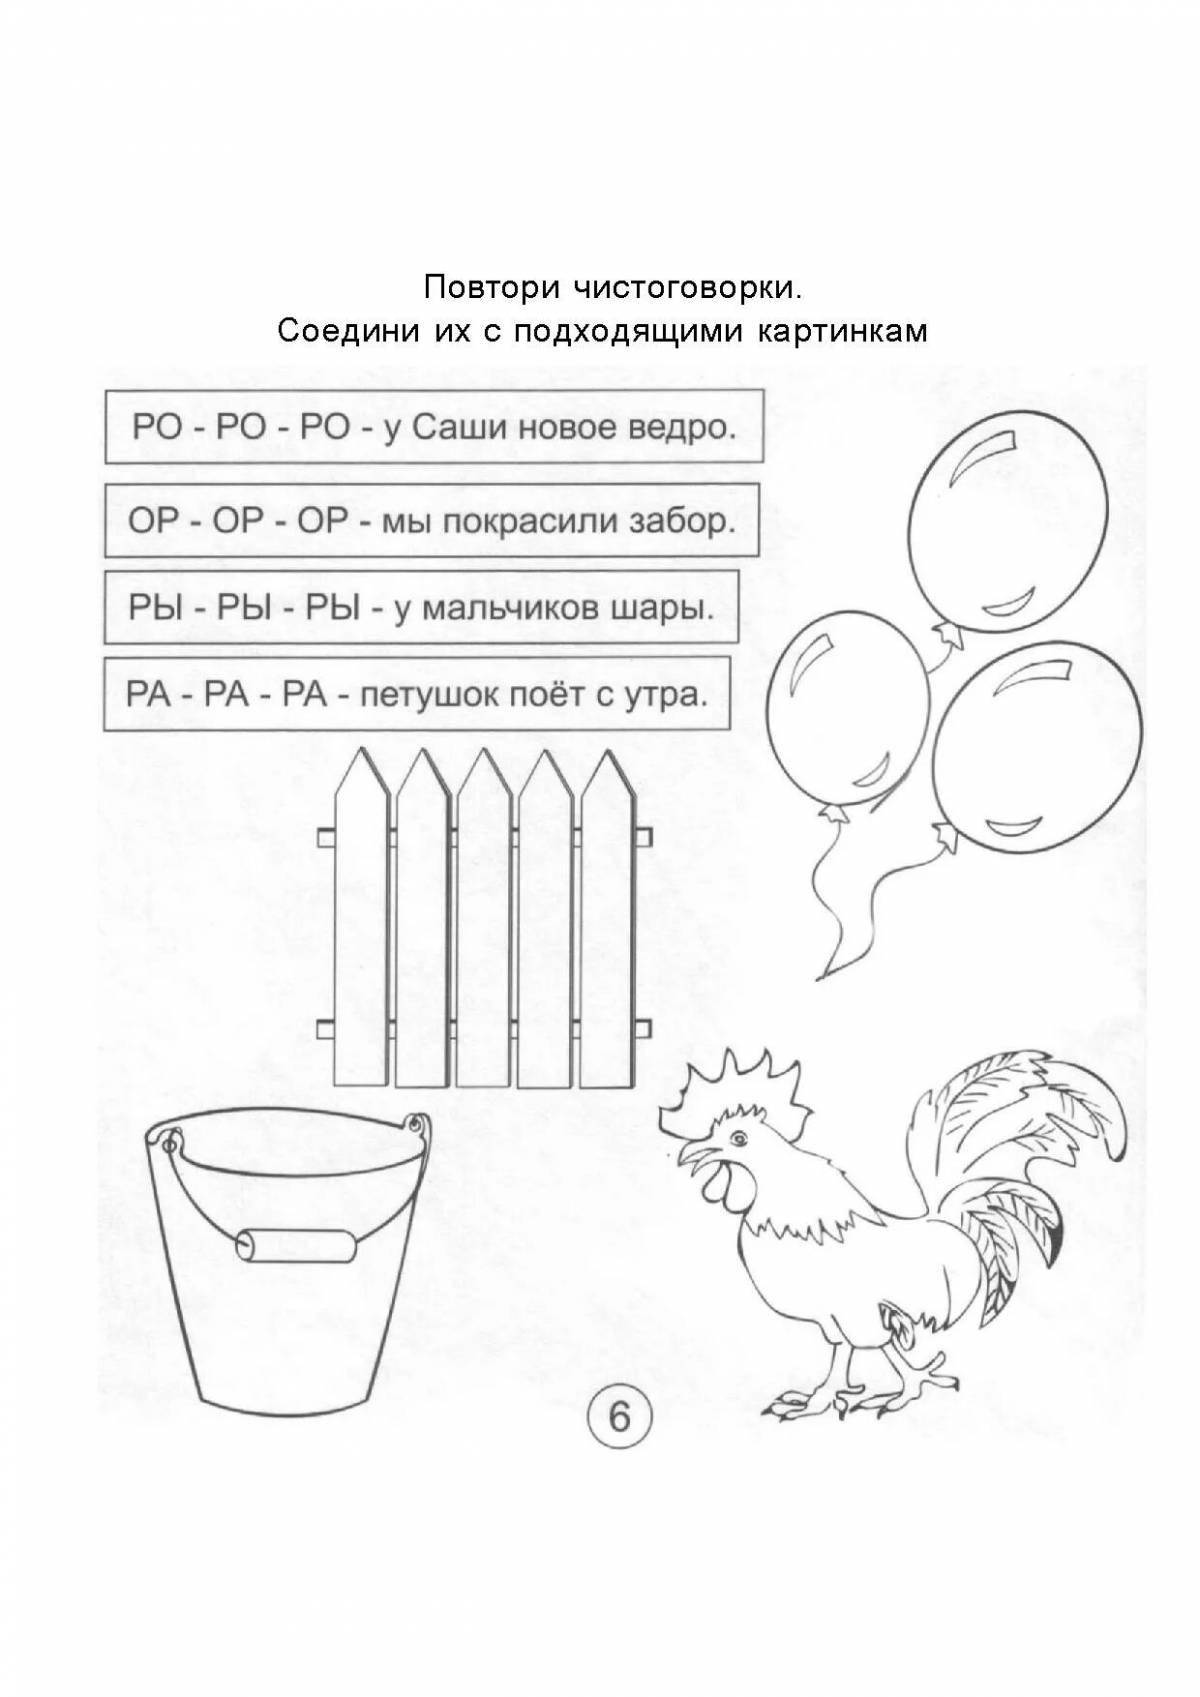 Fun sonic speech therapy coloring page